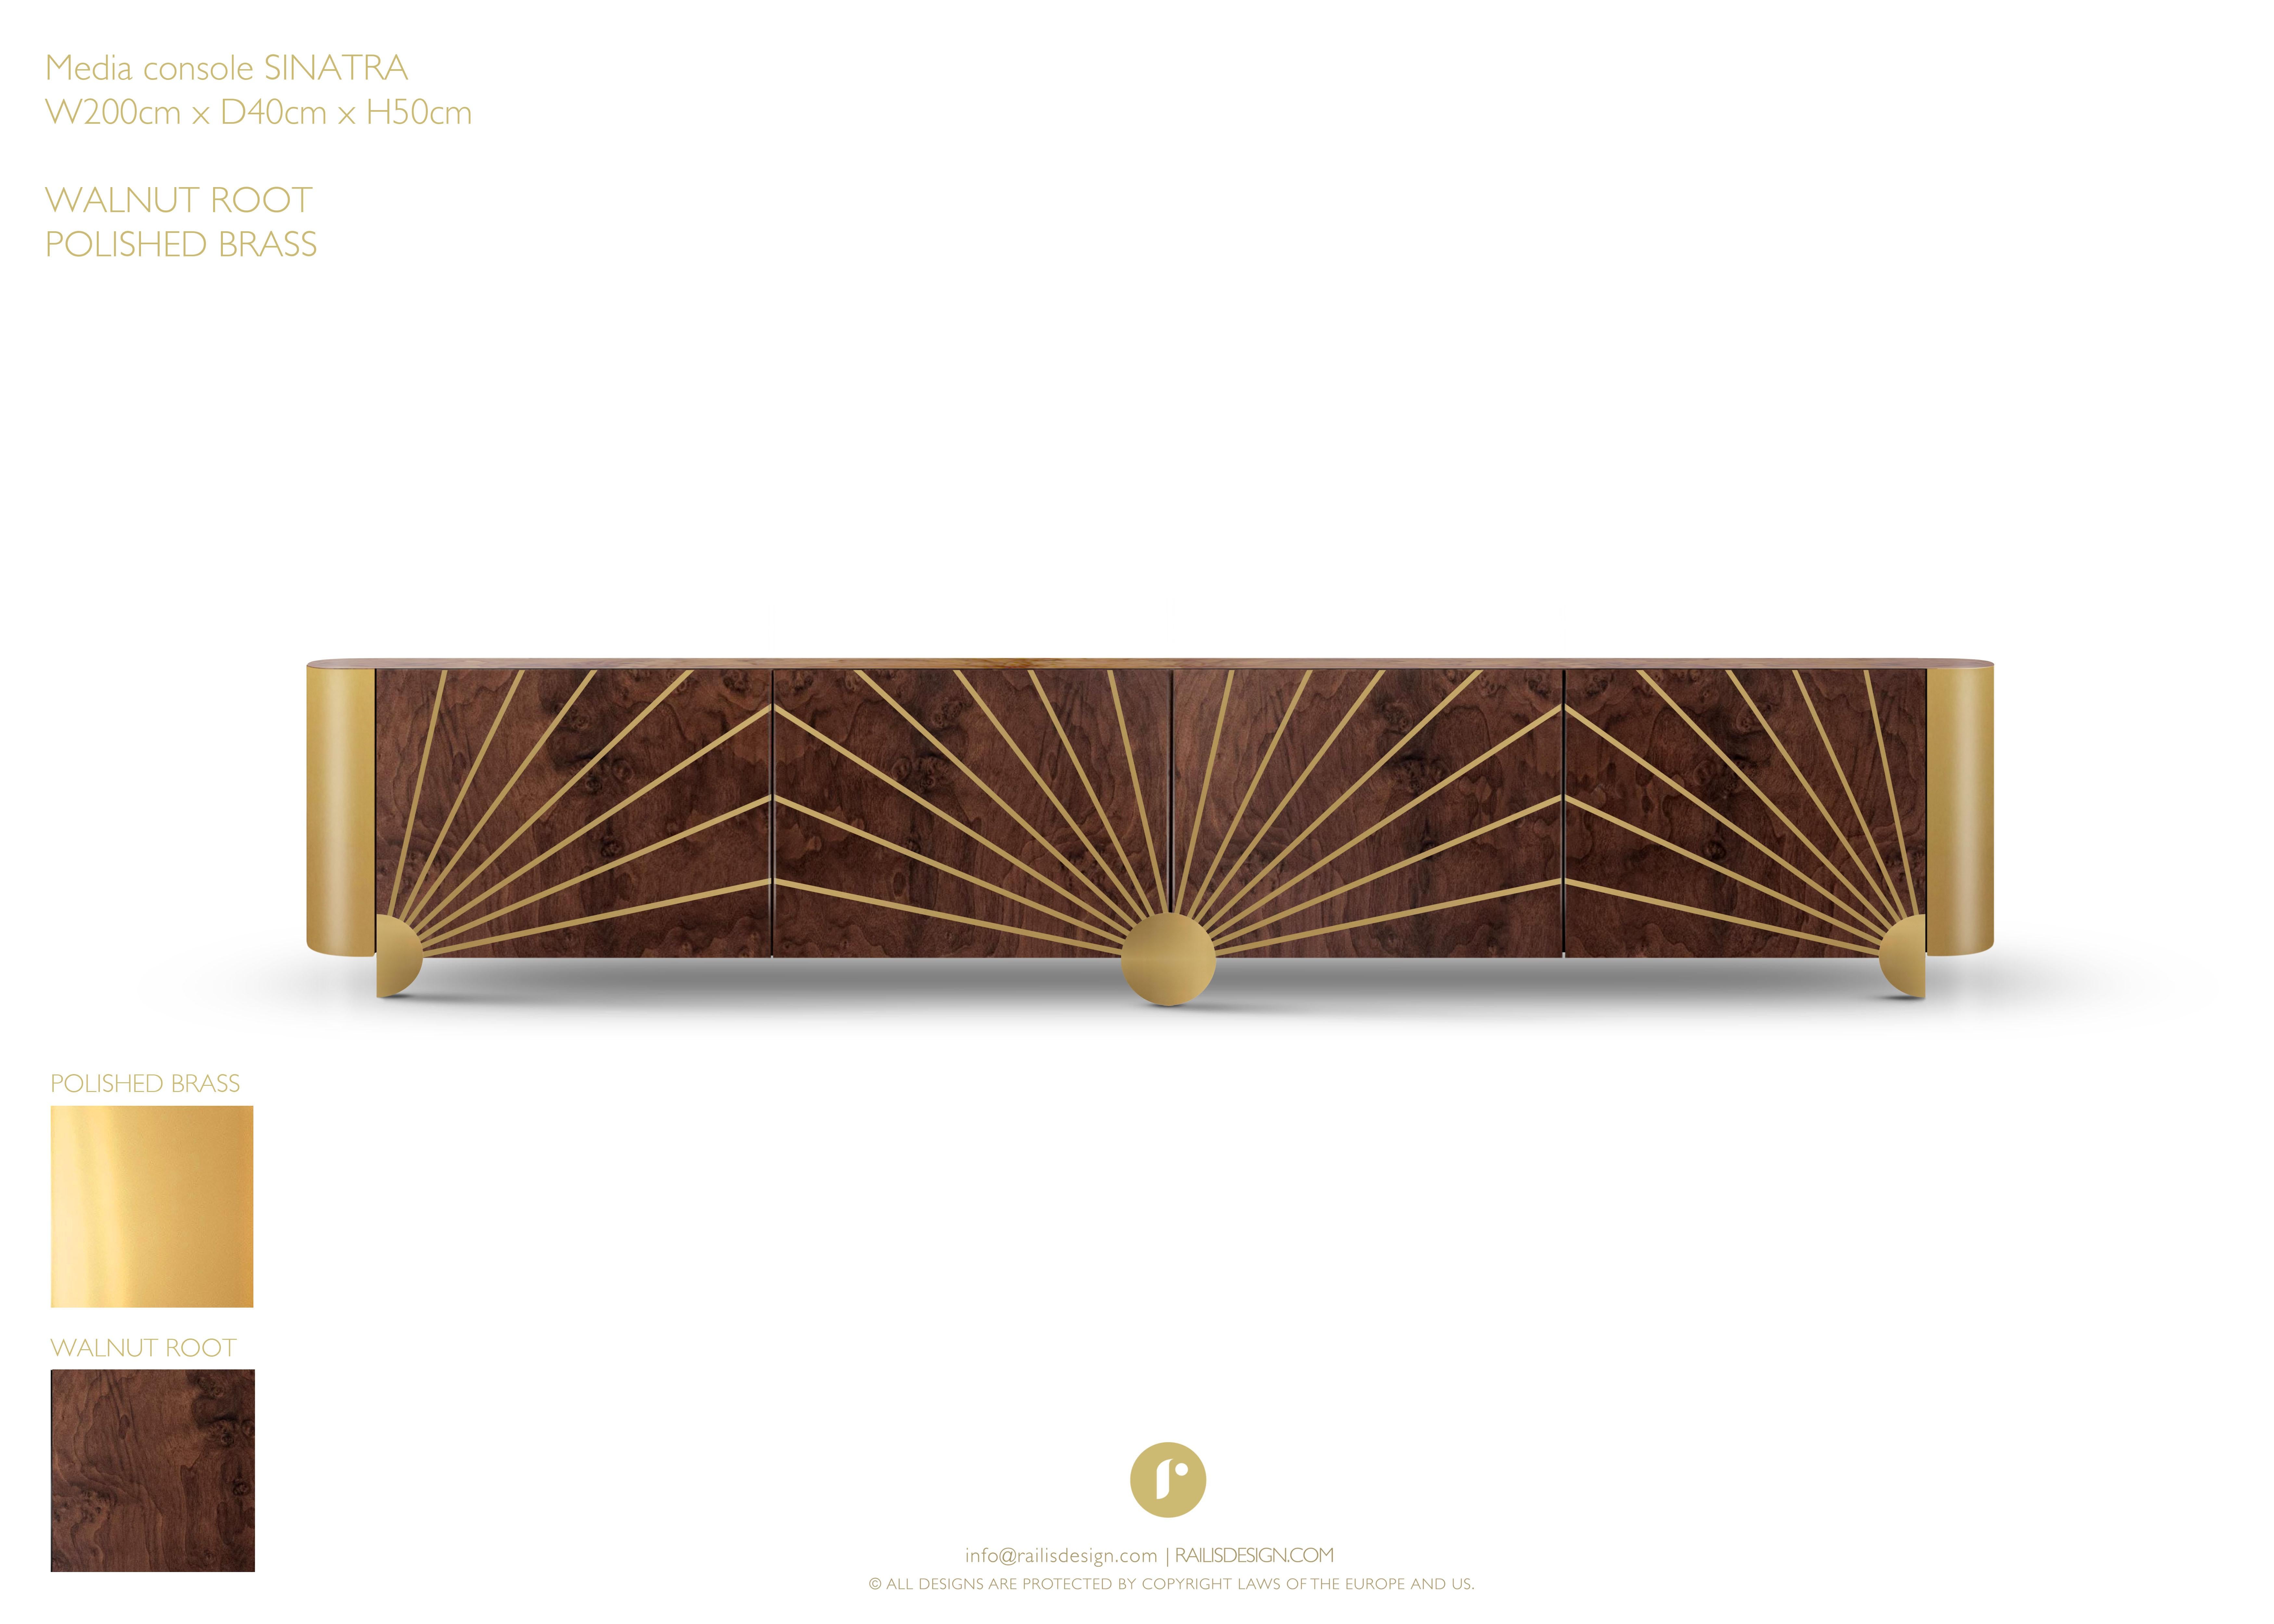 Media console Sinatra! A statement 4 -door console together with a push-pull opening mechanism to complete the contemporary look and feel. A fabulous console from a collection inspired by the art deco style each item is truly precious, where metal